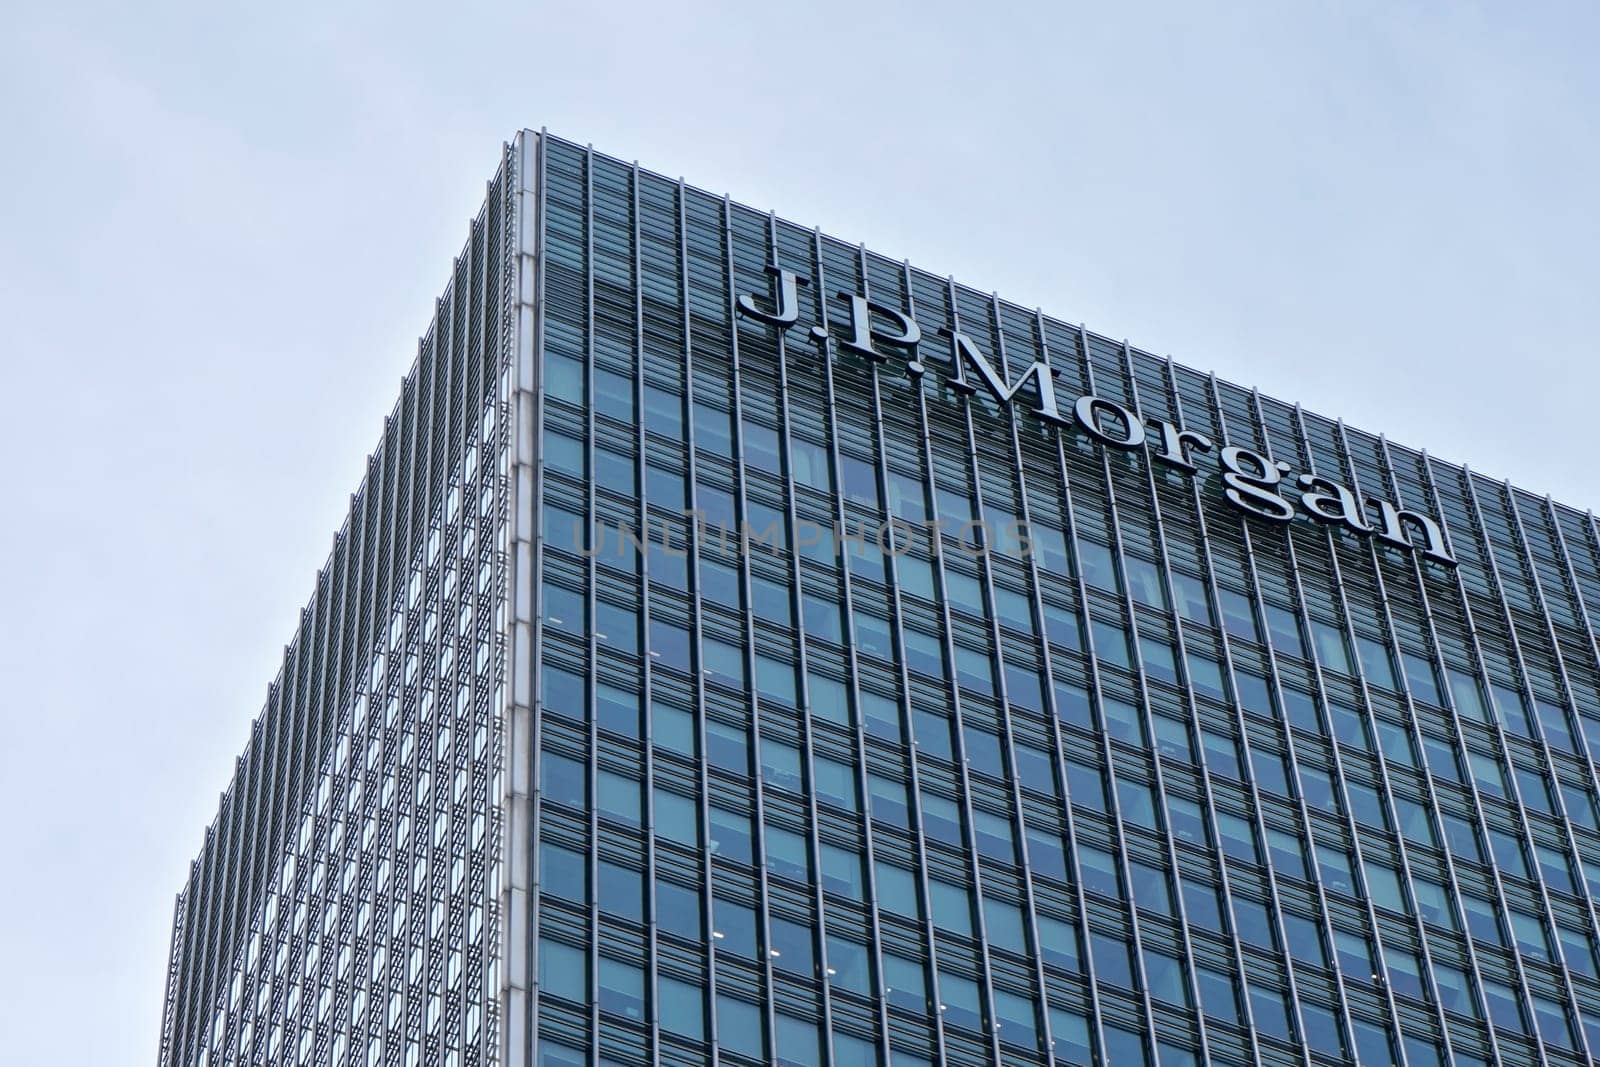 London, United Kingdom - February 03, 2019: Sun shines on J P Morgan signage at top of their UK branch at Canary Wharf. JPMorgan Chase is US multinational investment bank founded (originally) 1799 by Ivanko